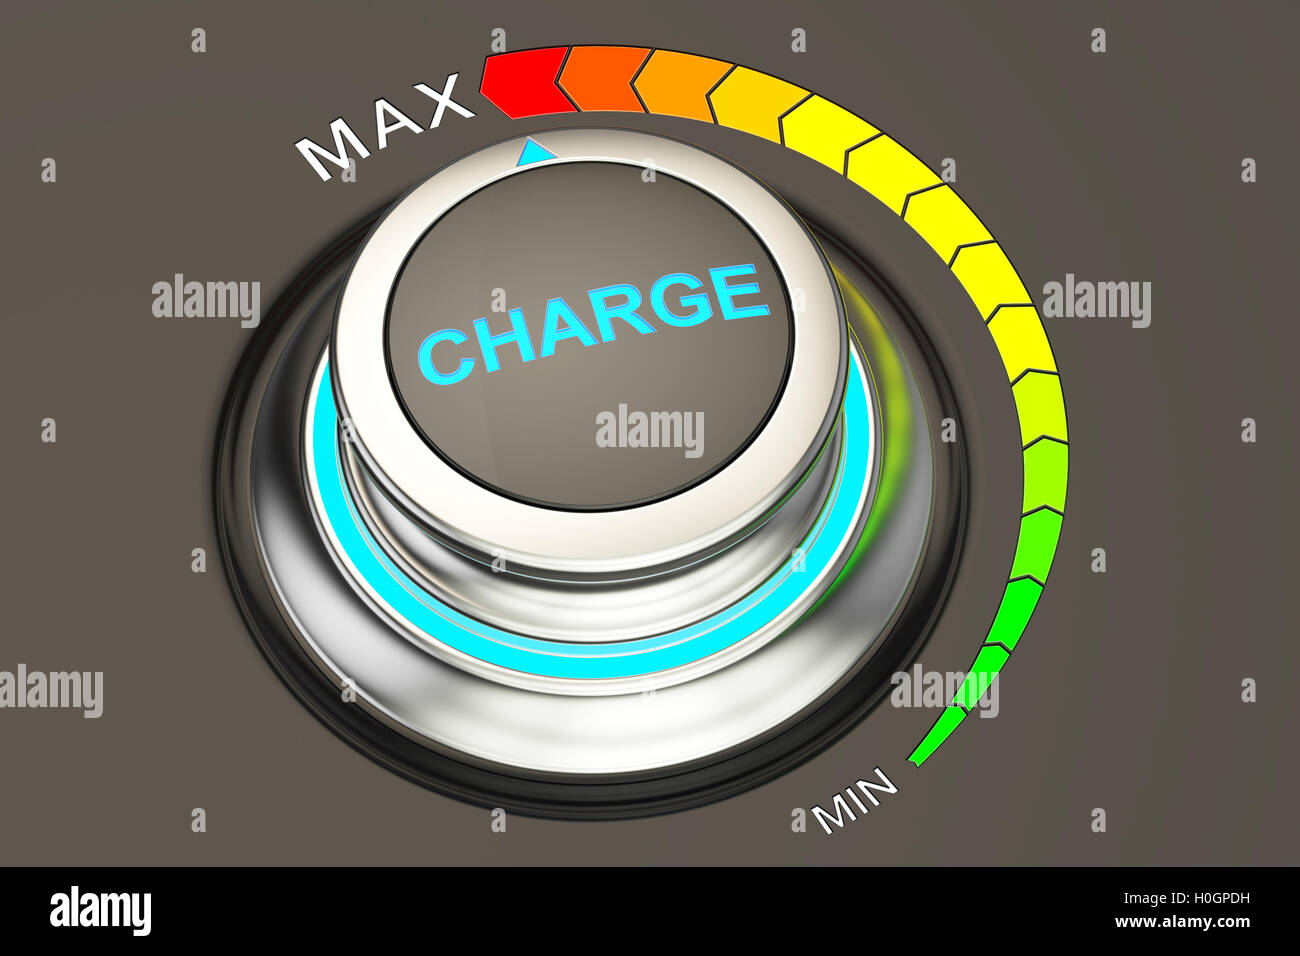 high level of charge concept, 3D rendering Stock Photo